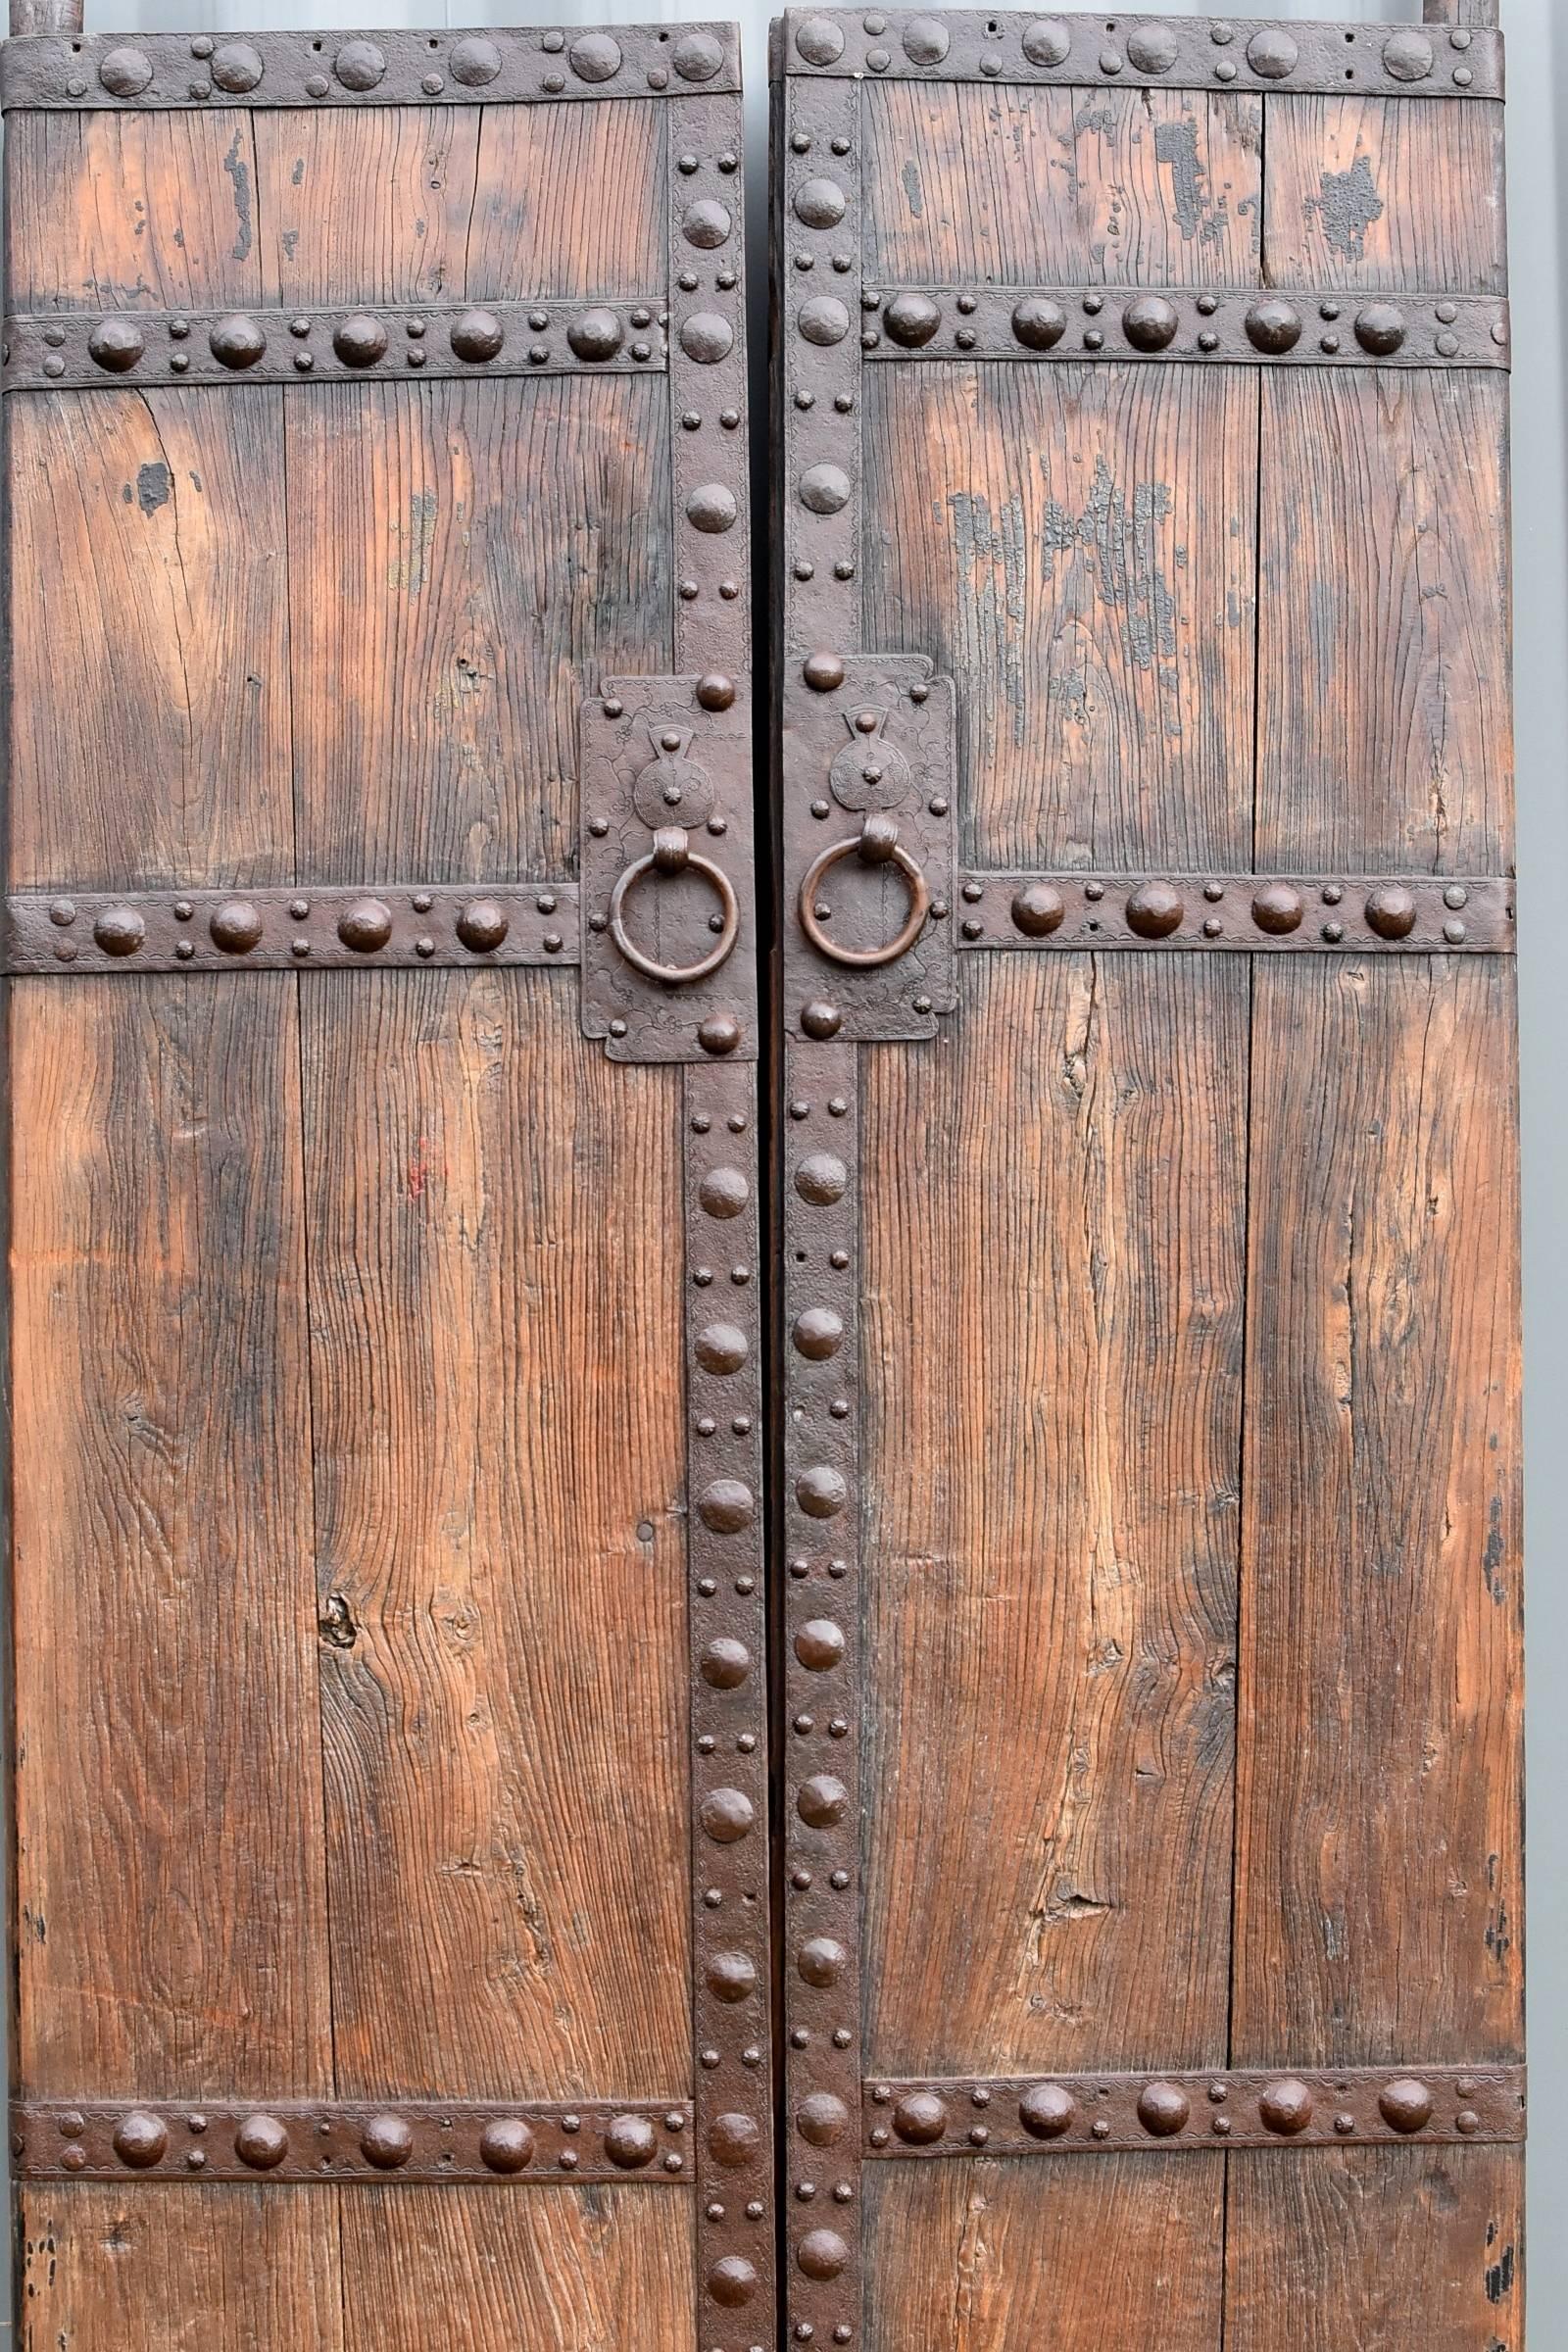 A pair of strong, rustic antique doors from northern China. 

These are very heavy, substantial, solid wood doors. The 2